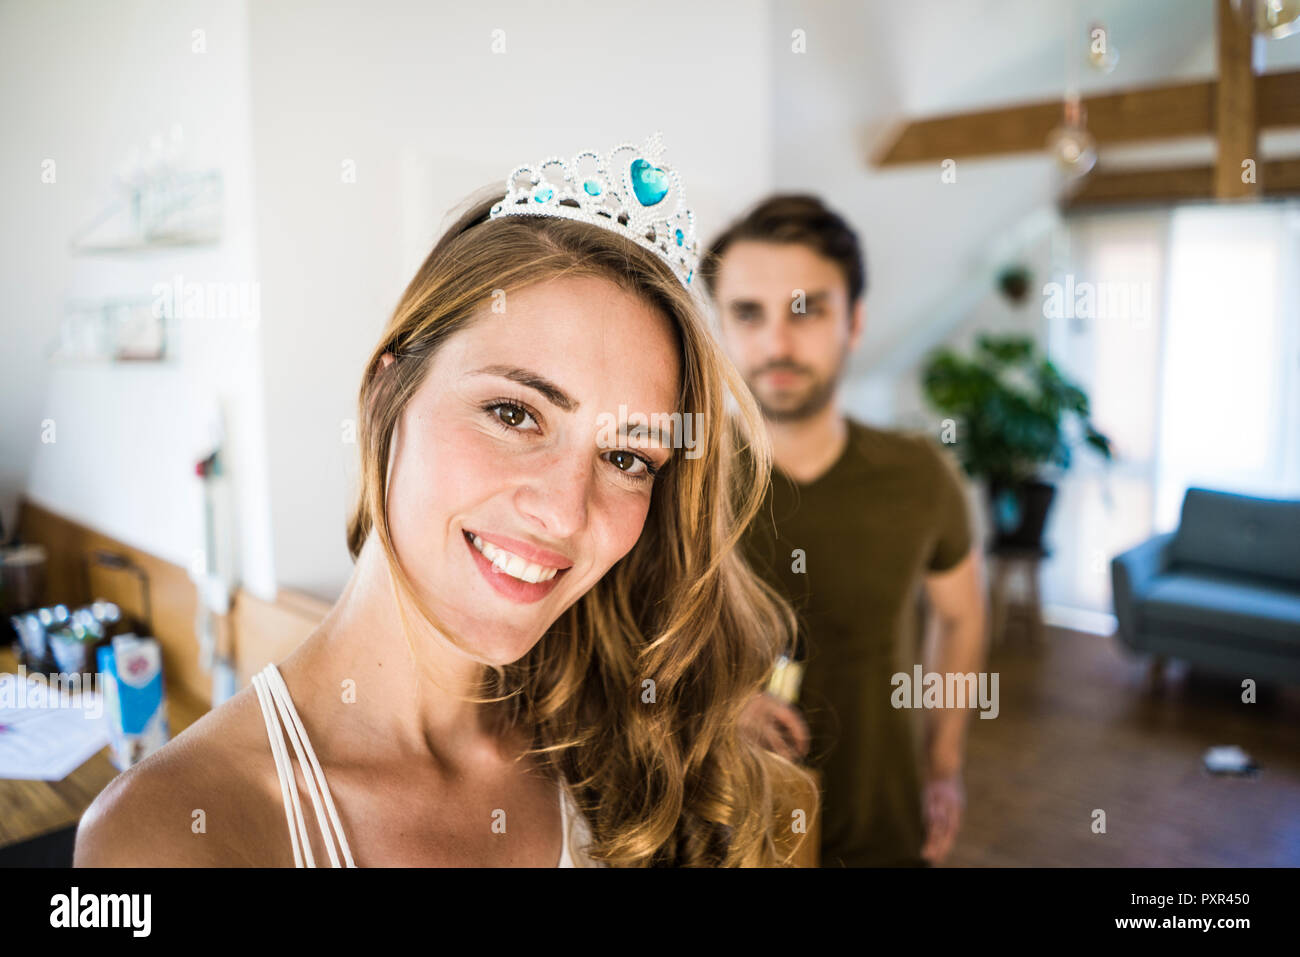 Portrait of smiling woman wearing tiara at home with man in background Stock Photo